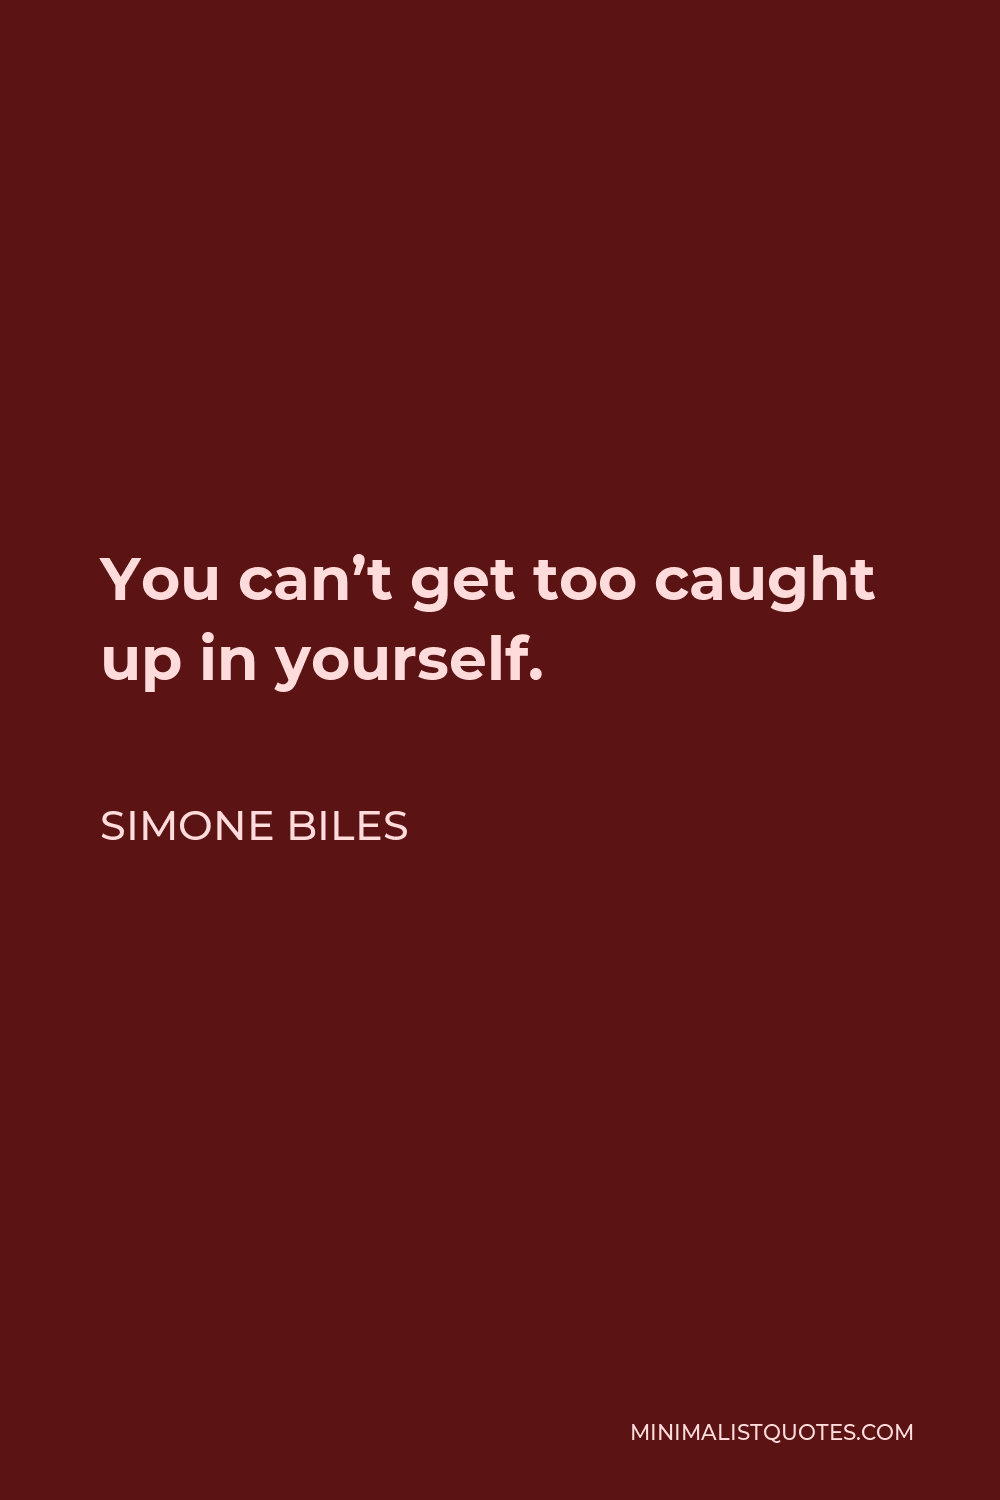 Simone Biles Quote - You can’t get too caught up in yourself.